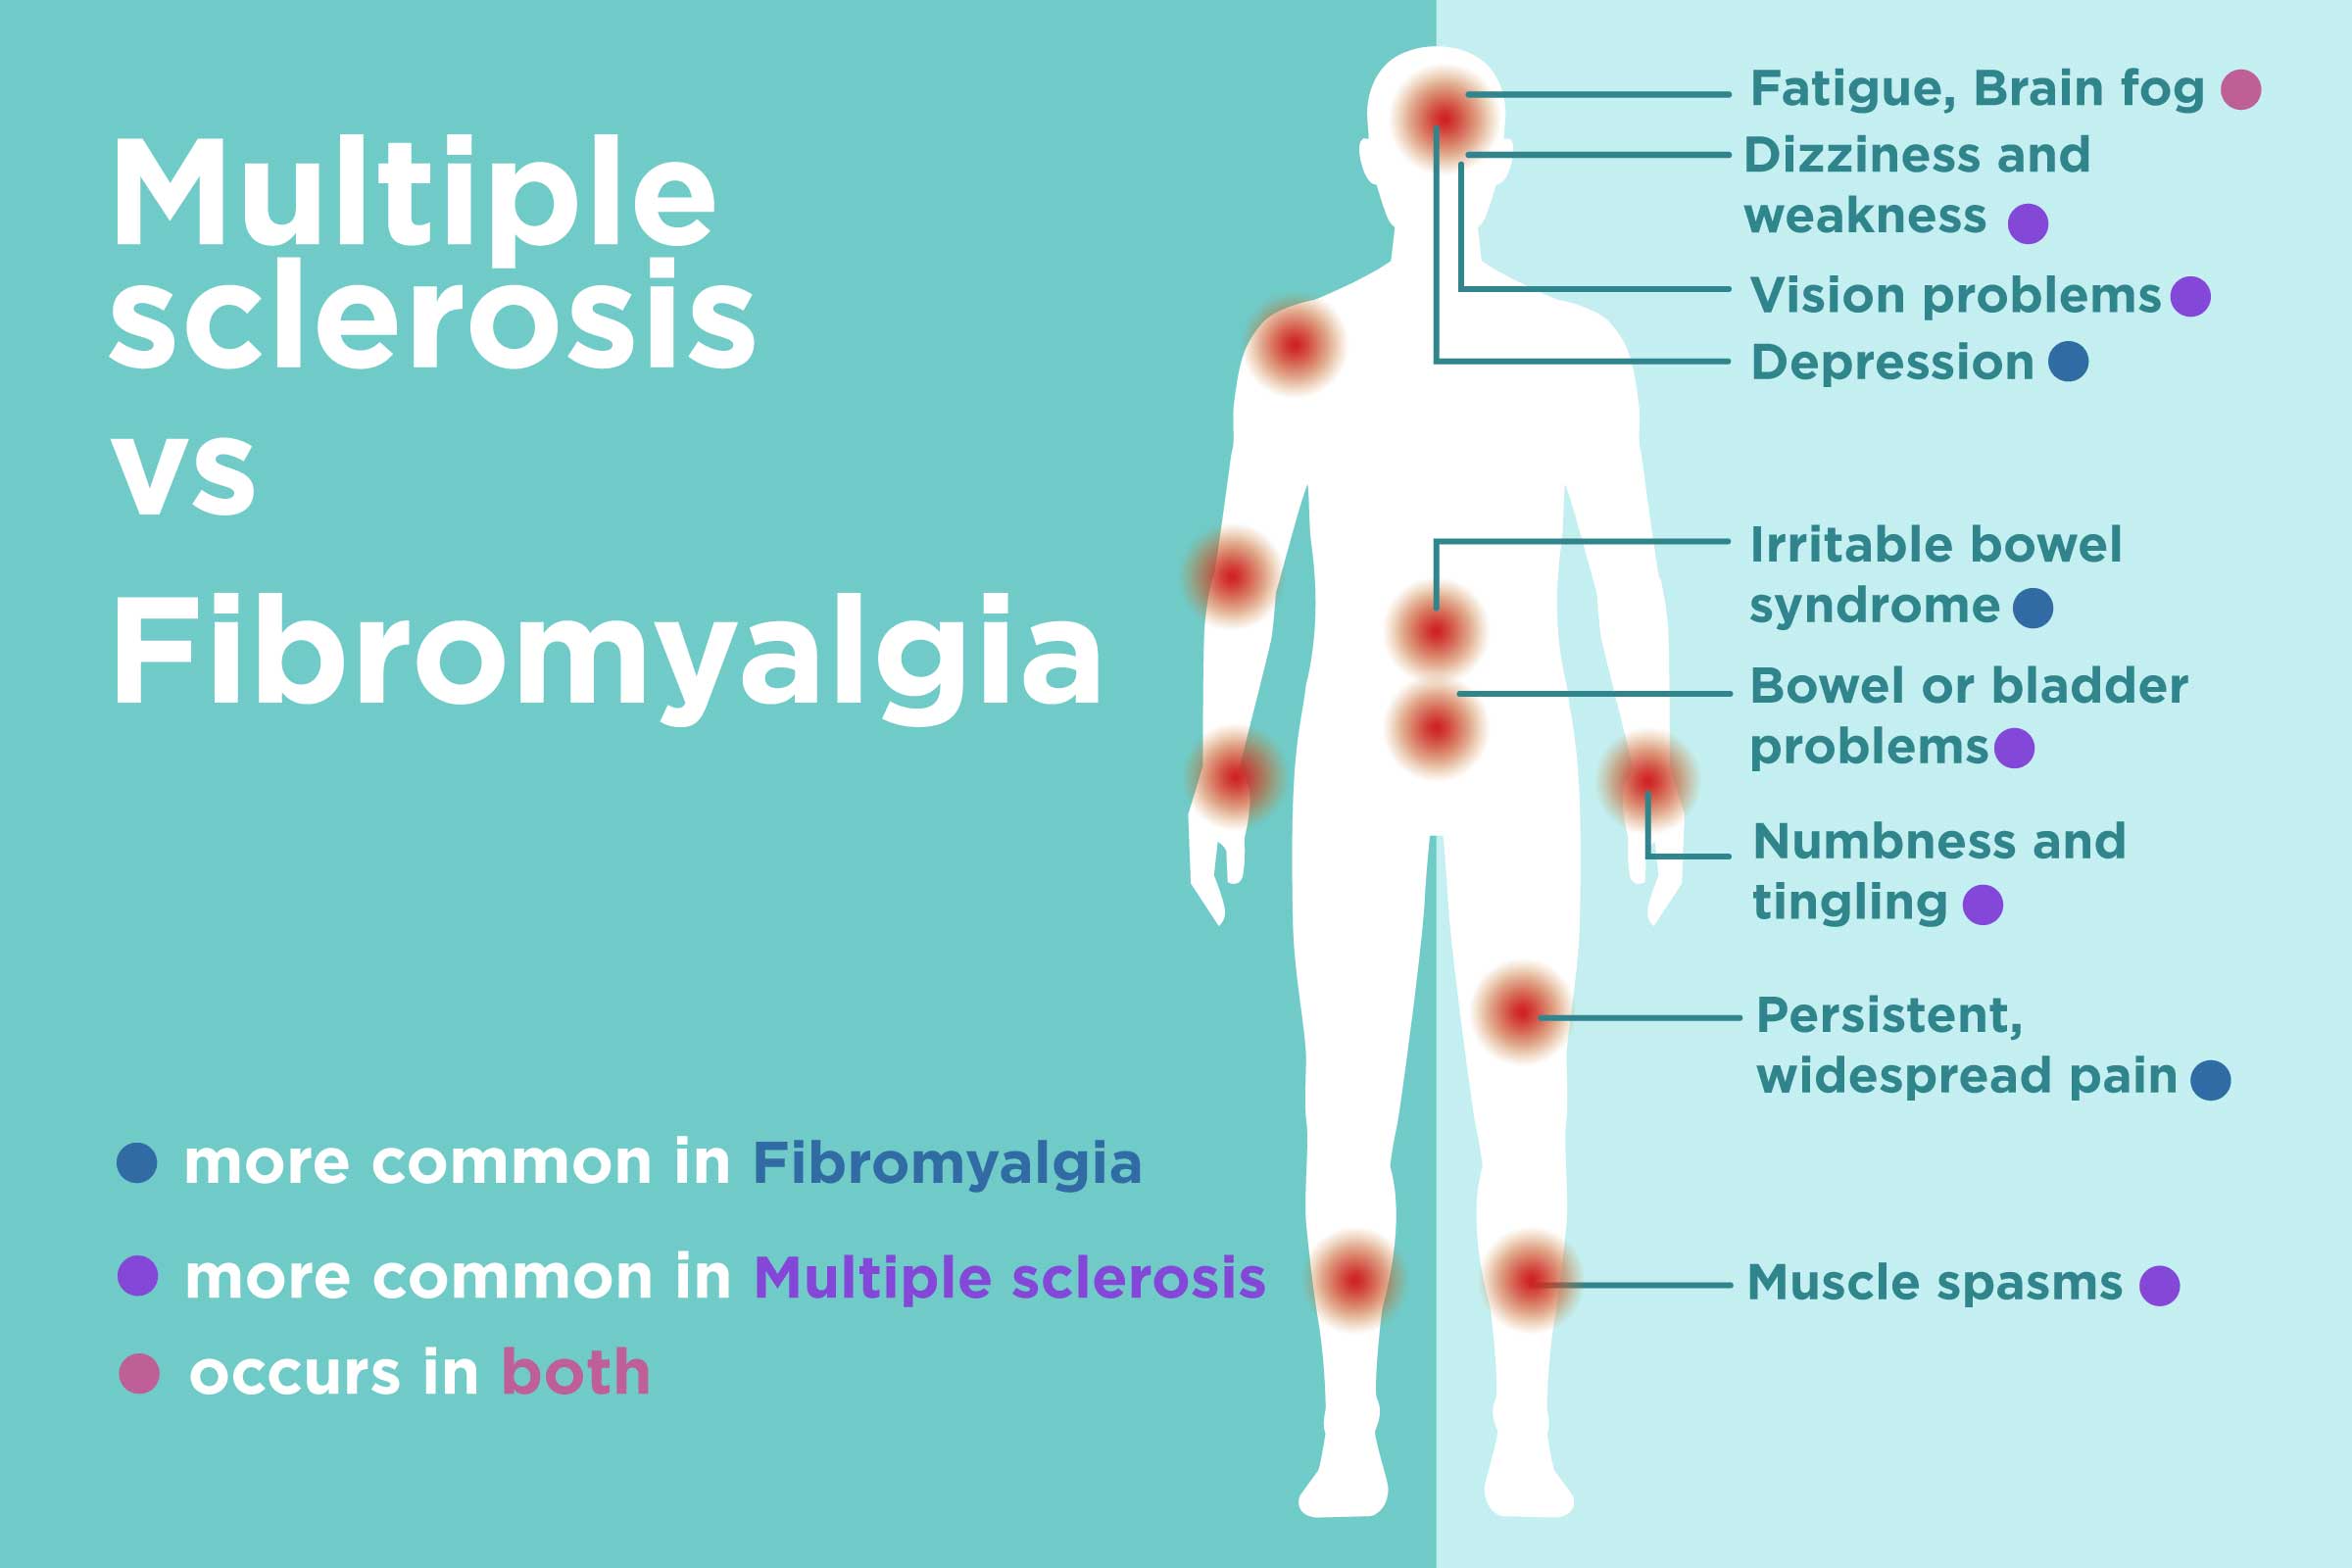 How to Apply for Disability Due to Fibromyalgia